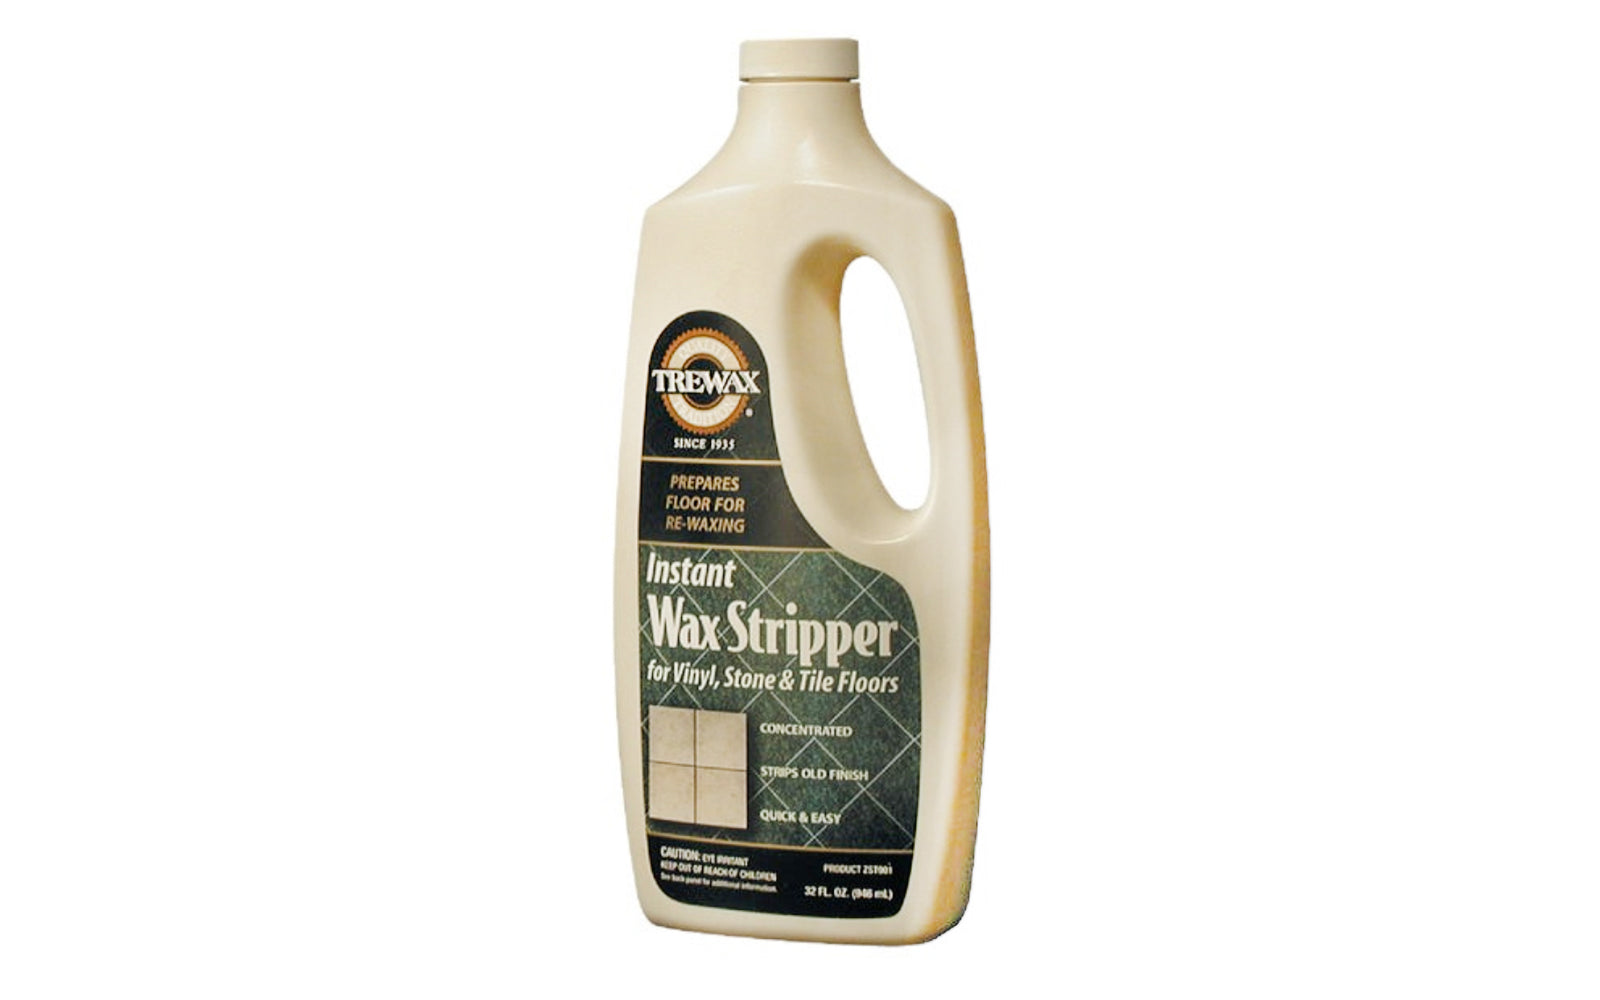 Trewax Heavy-Duty Floor Stripper - 32 fl oz. Trewax's no scrub formula is a combination of emulsifiers that quickly and easily penetrate and lift all brands of floor finishes for easy pick up with a mop or wet vacuum. Safe for any surface except wood. Easy-to-use without any offensive odors. Covers approximately 640 sq ft, depending on how porous the flooring is and how many coats of wax need removed. 